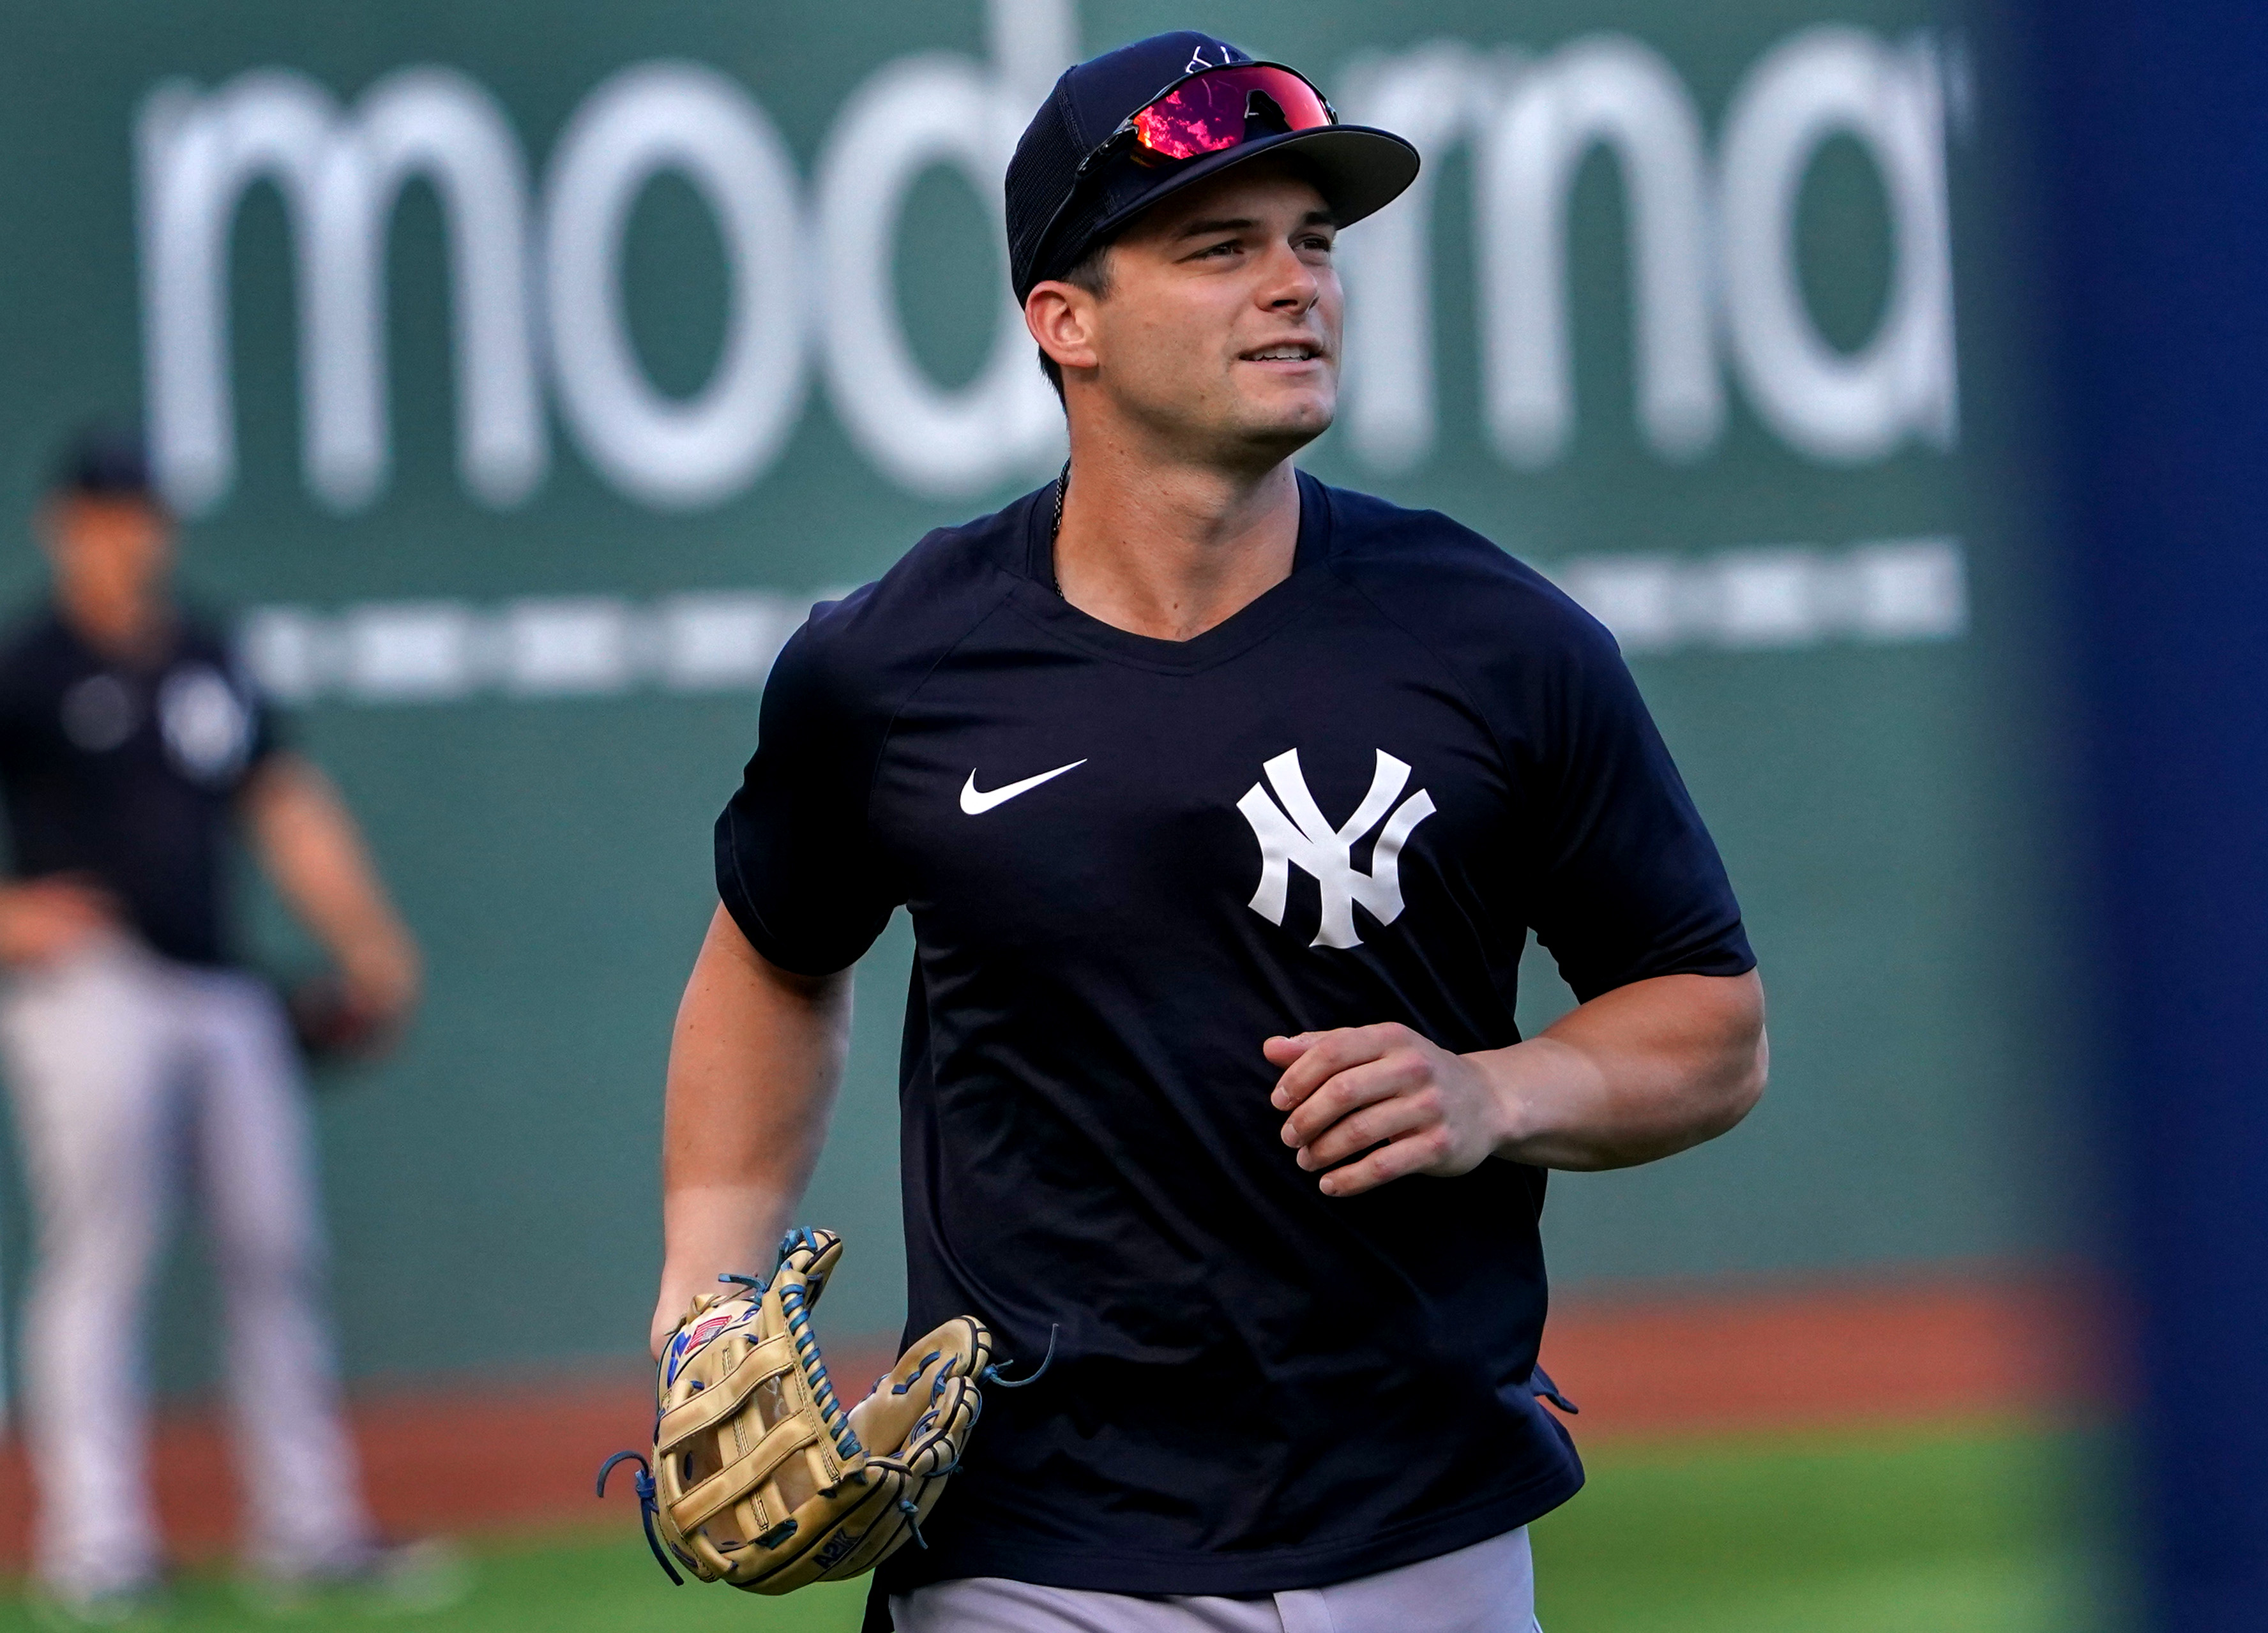 Boston Red Sox 2020 Season Preview: Can Andrew Benintendi hit for